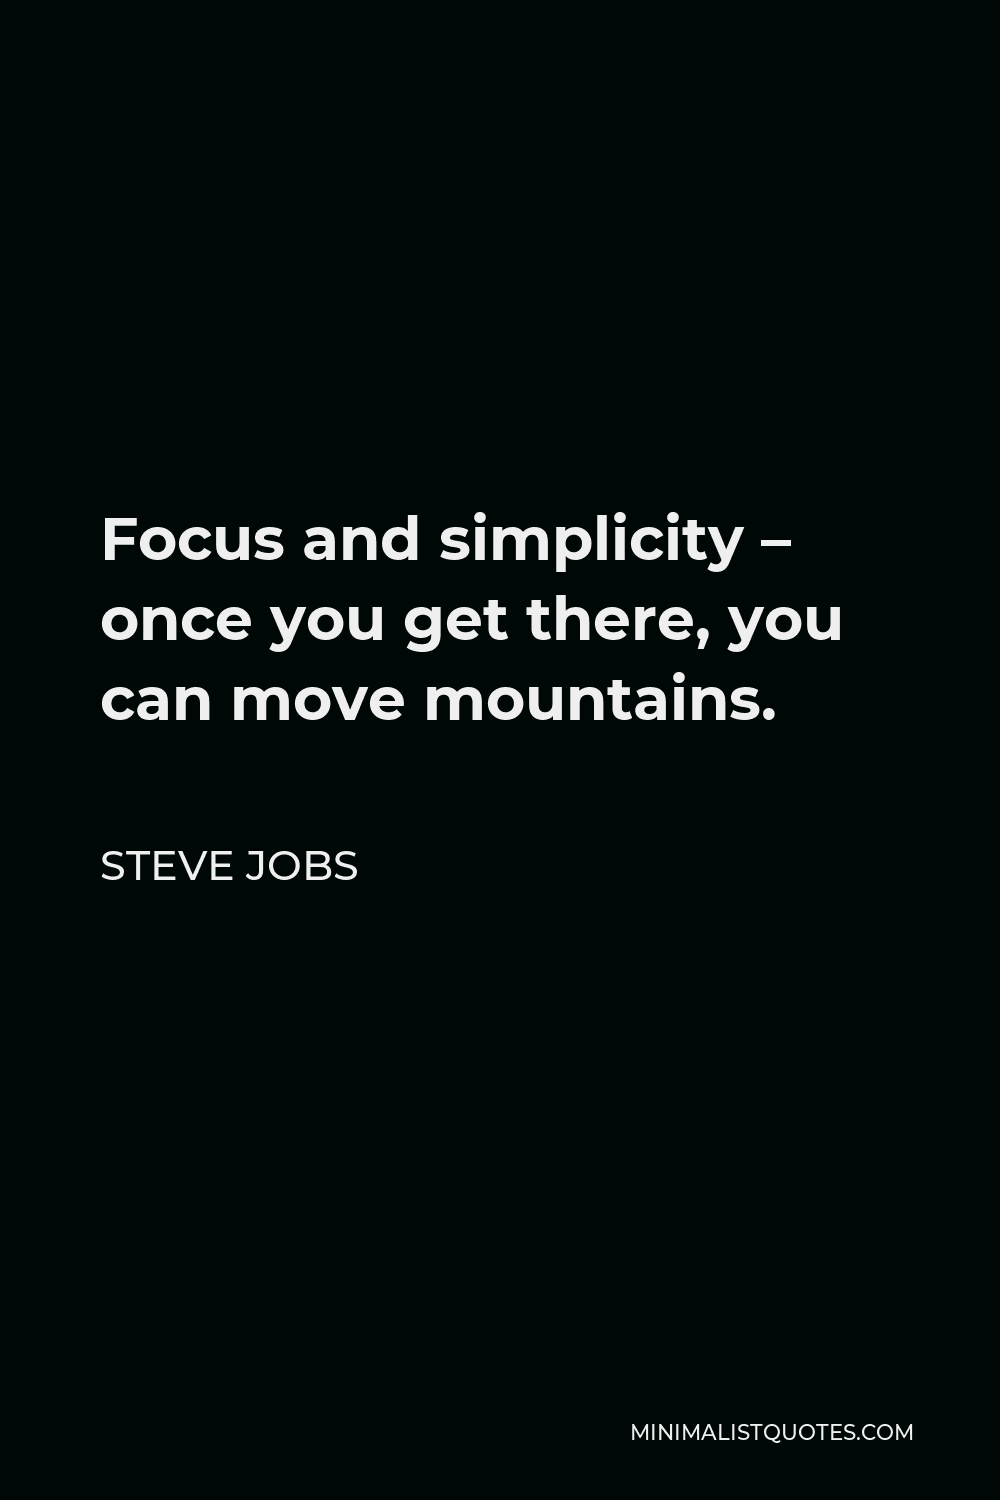 Steve Jobs Quote - Focus and simplicity – once you get there, you can move mountains.